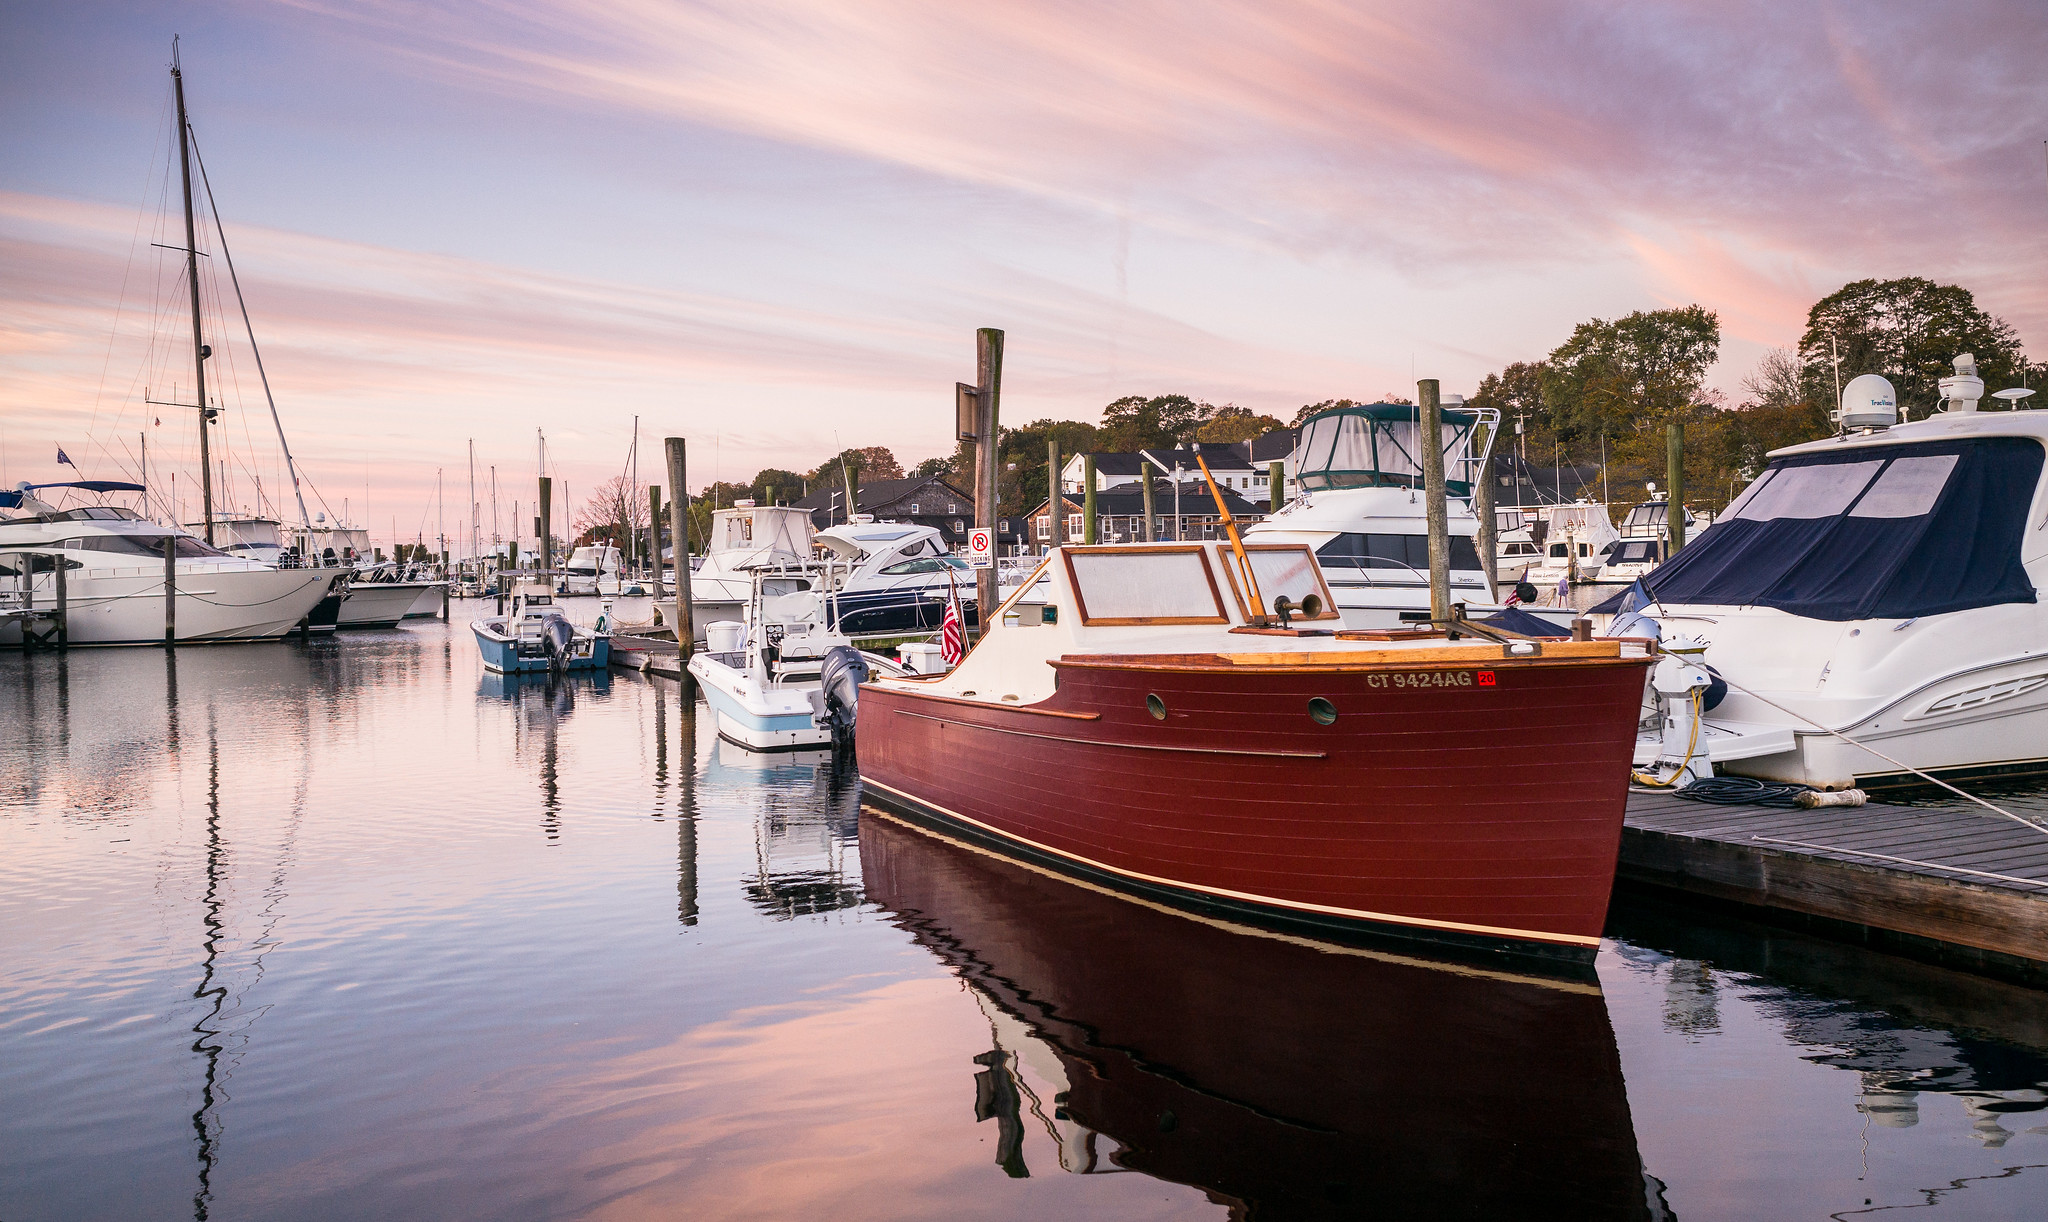 15 Things to do in Mystic, Connecticut